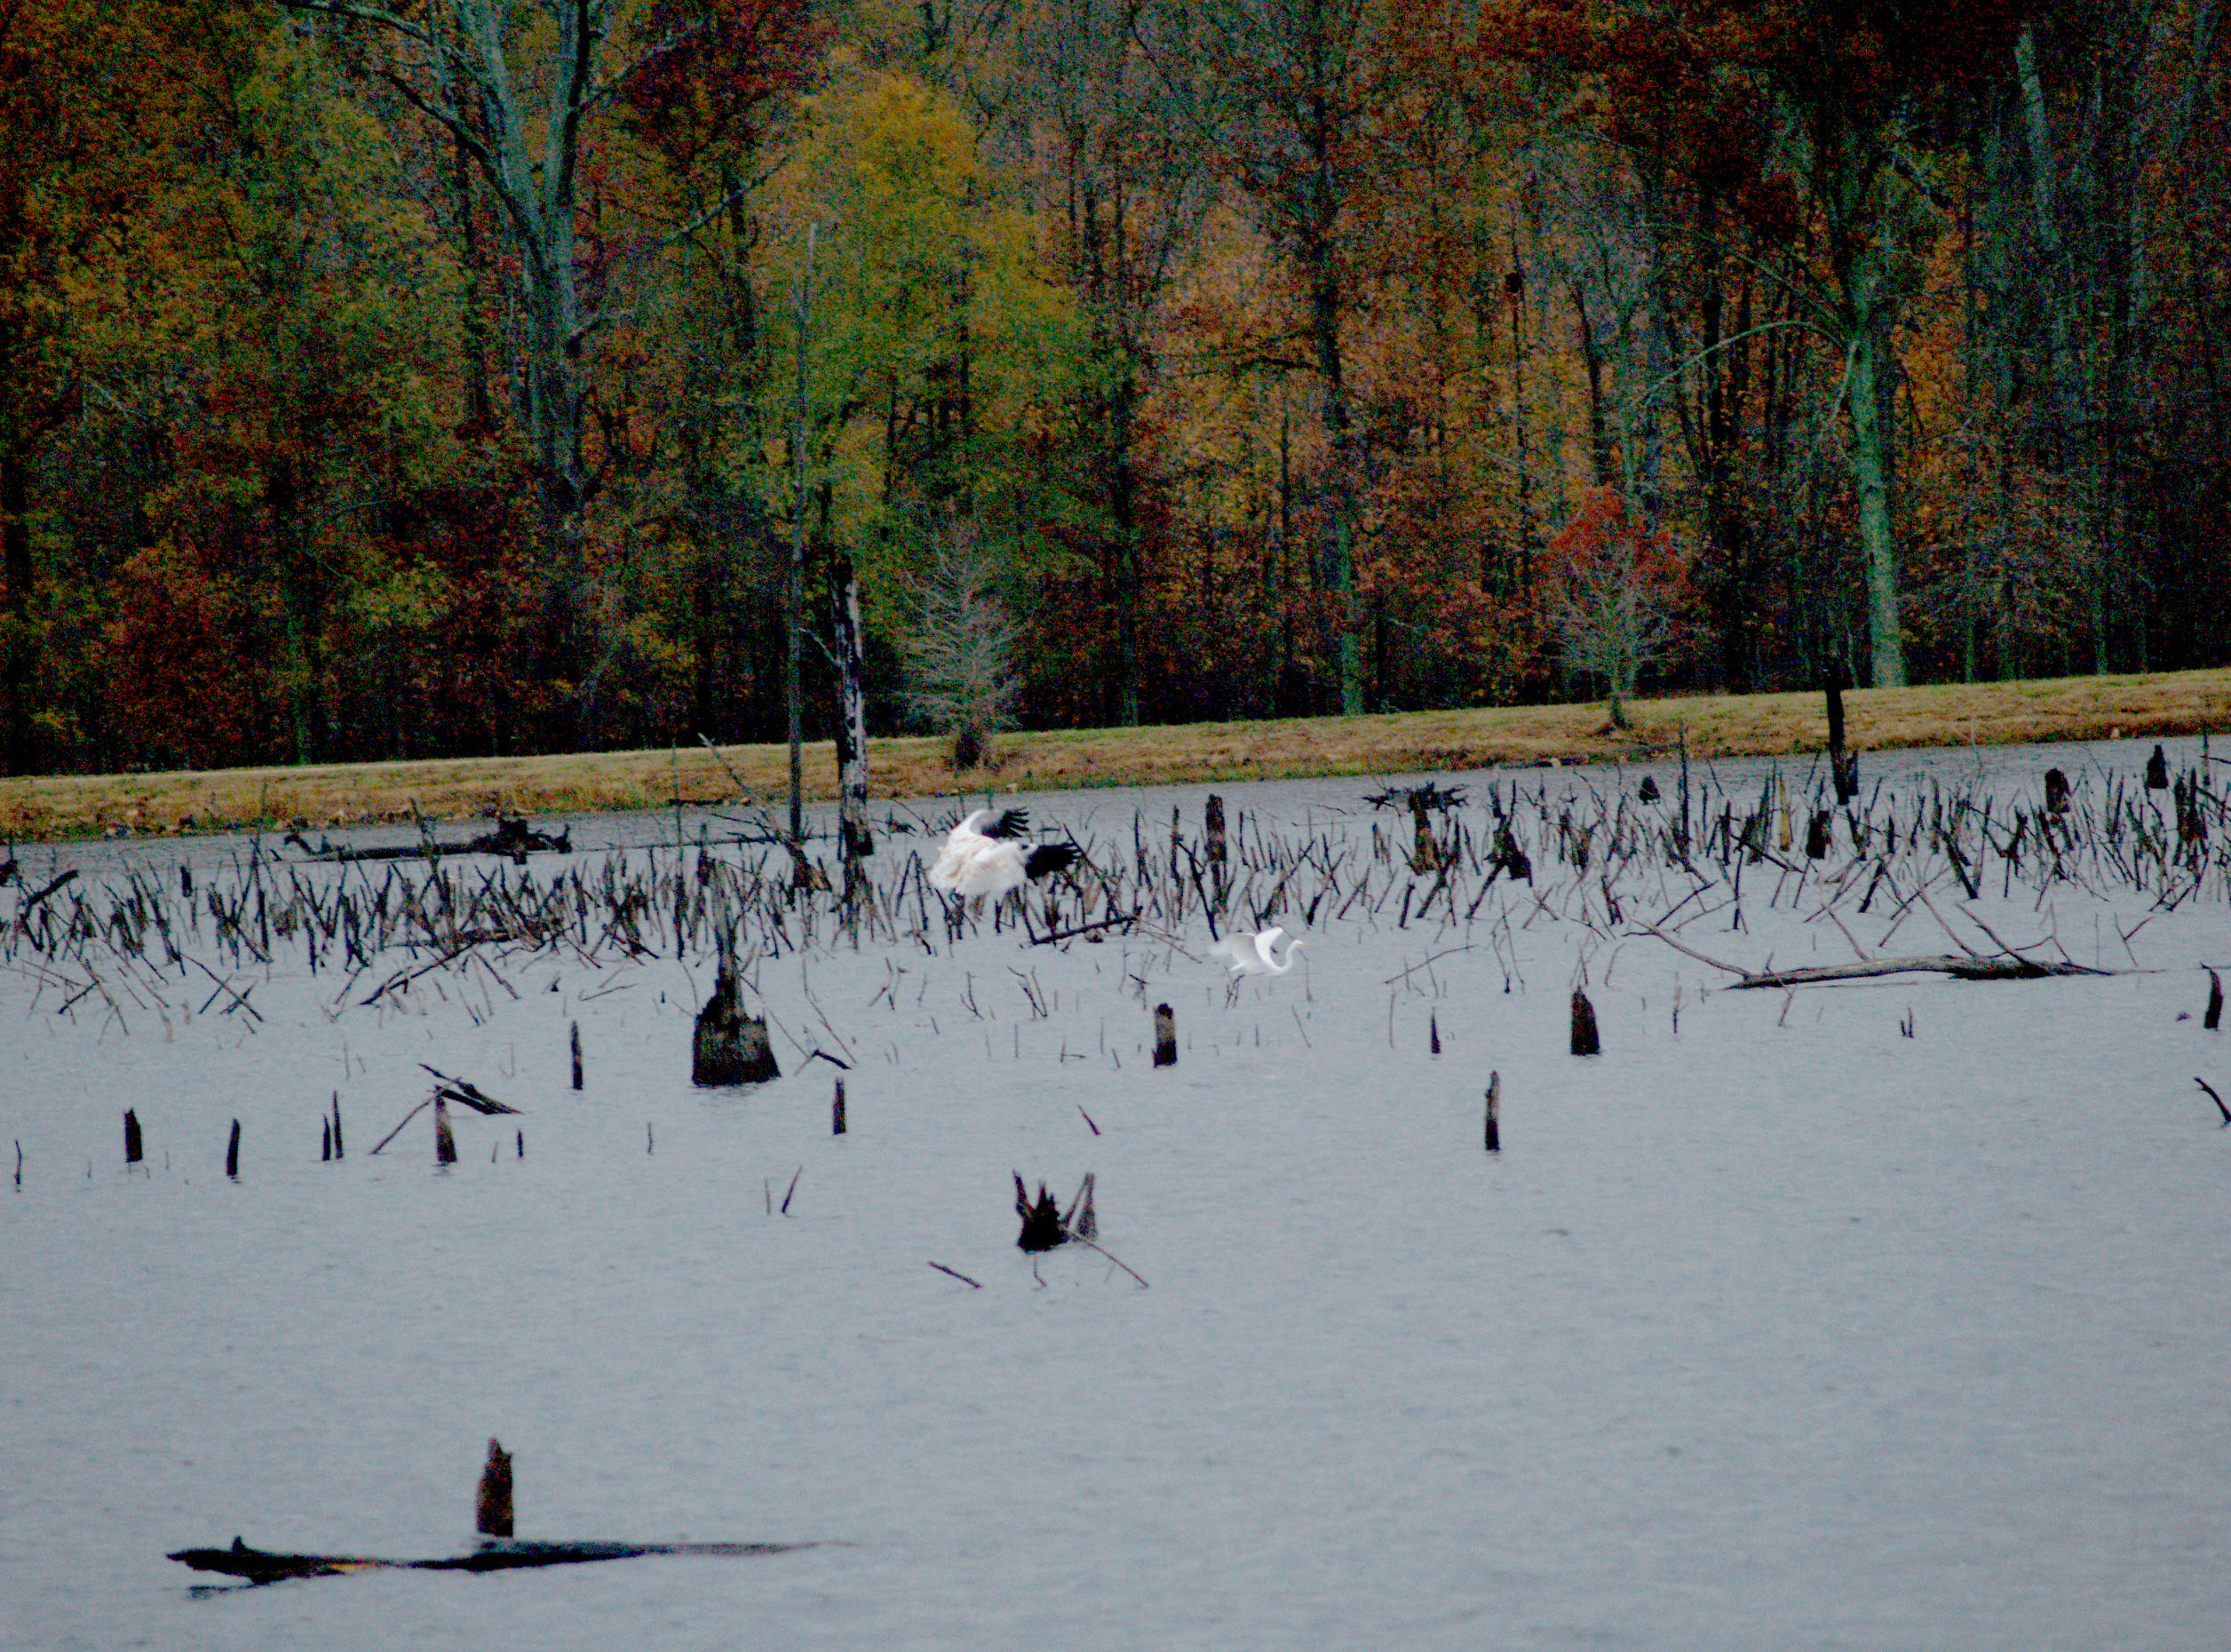 Whooping Crane - 11-26-07 - with Great Egret